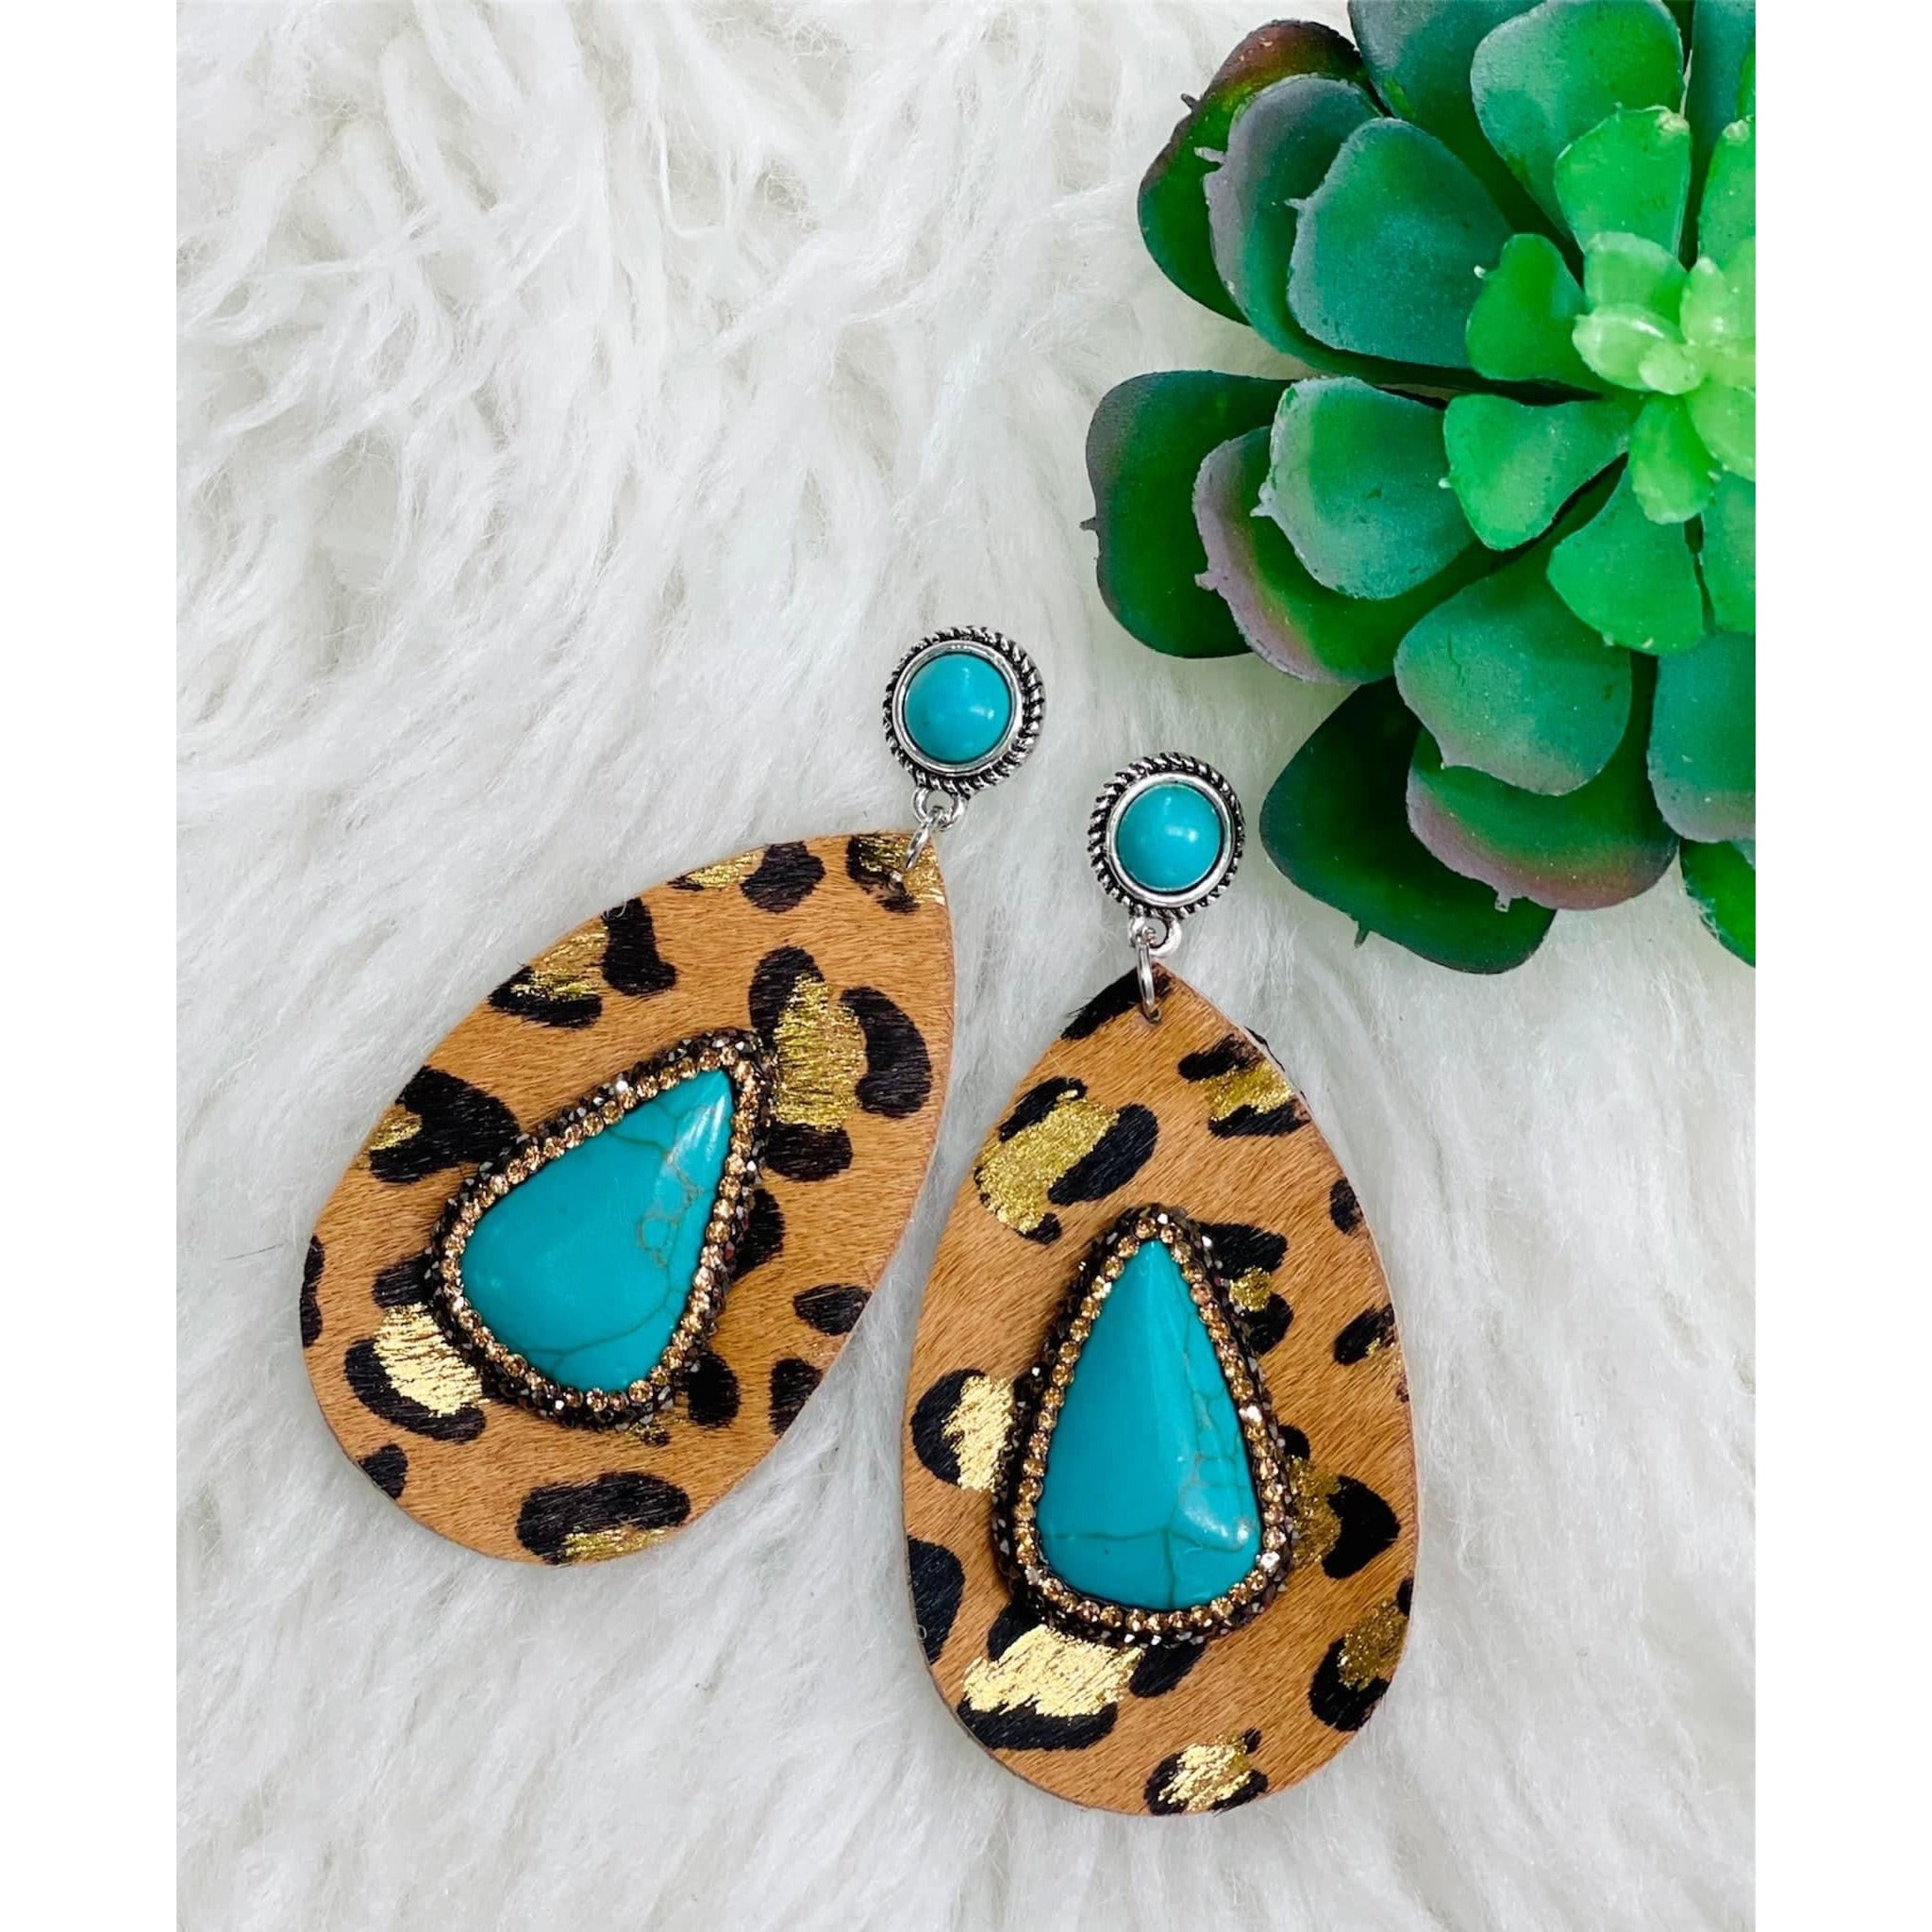 Leopard Earrings with Turquoise Stone